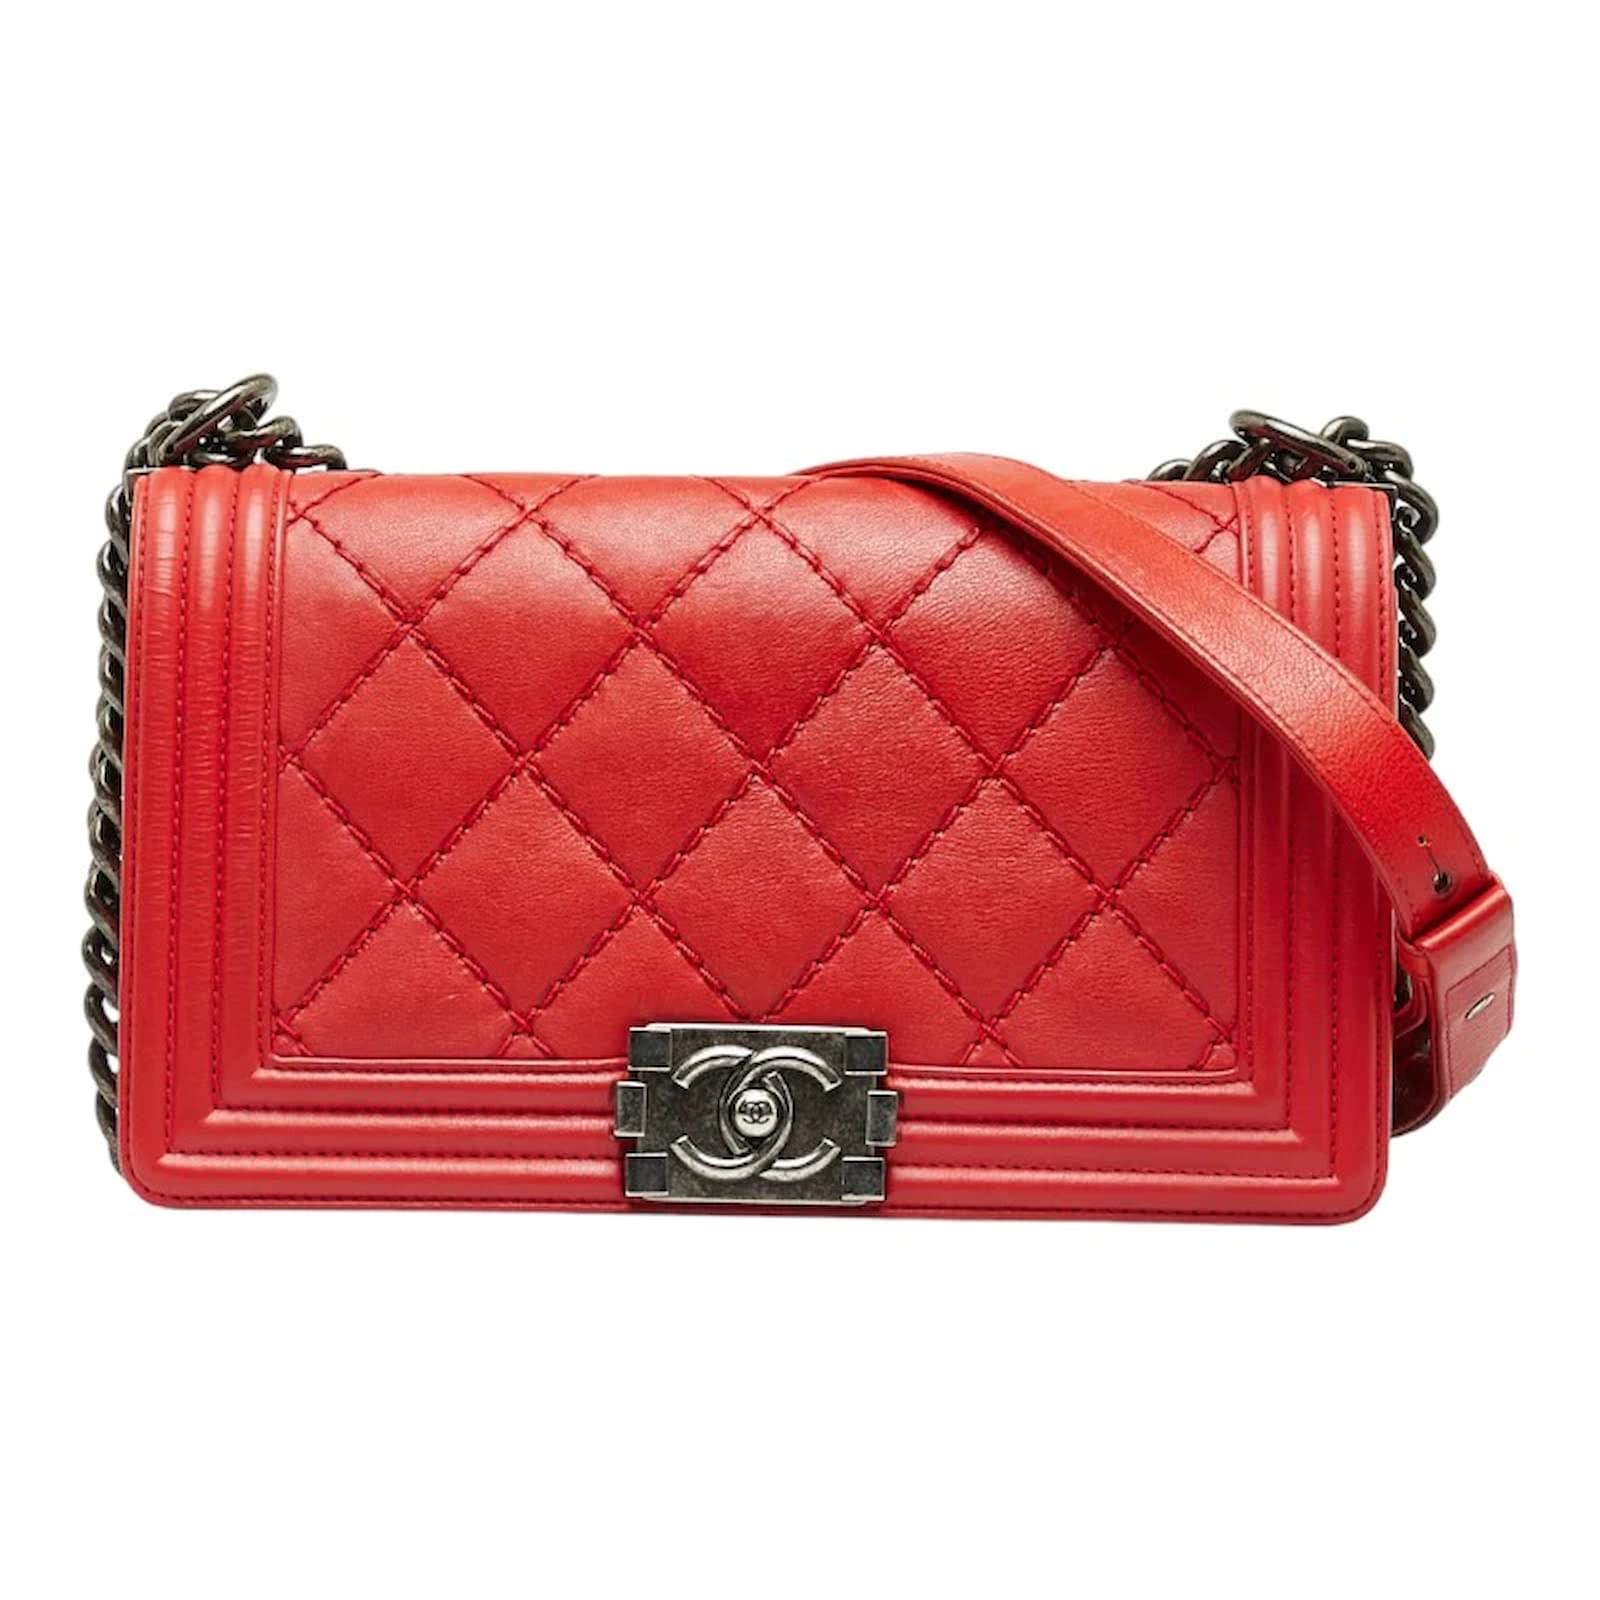 Chanel Medium Classic Le Boy Flap Bag Red Leather Pony-style